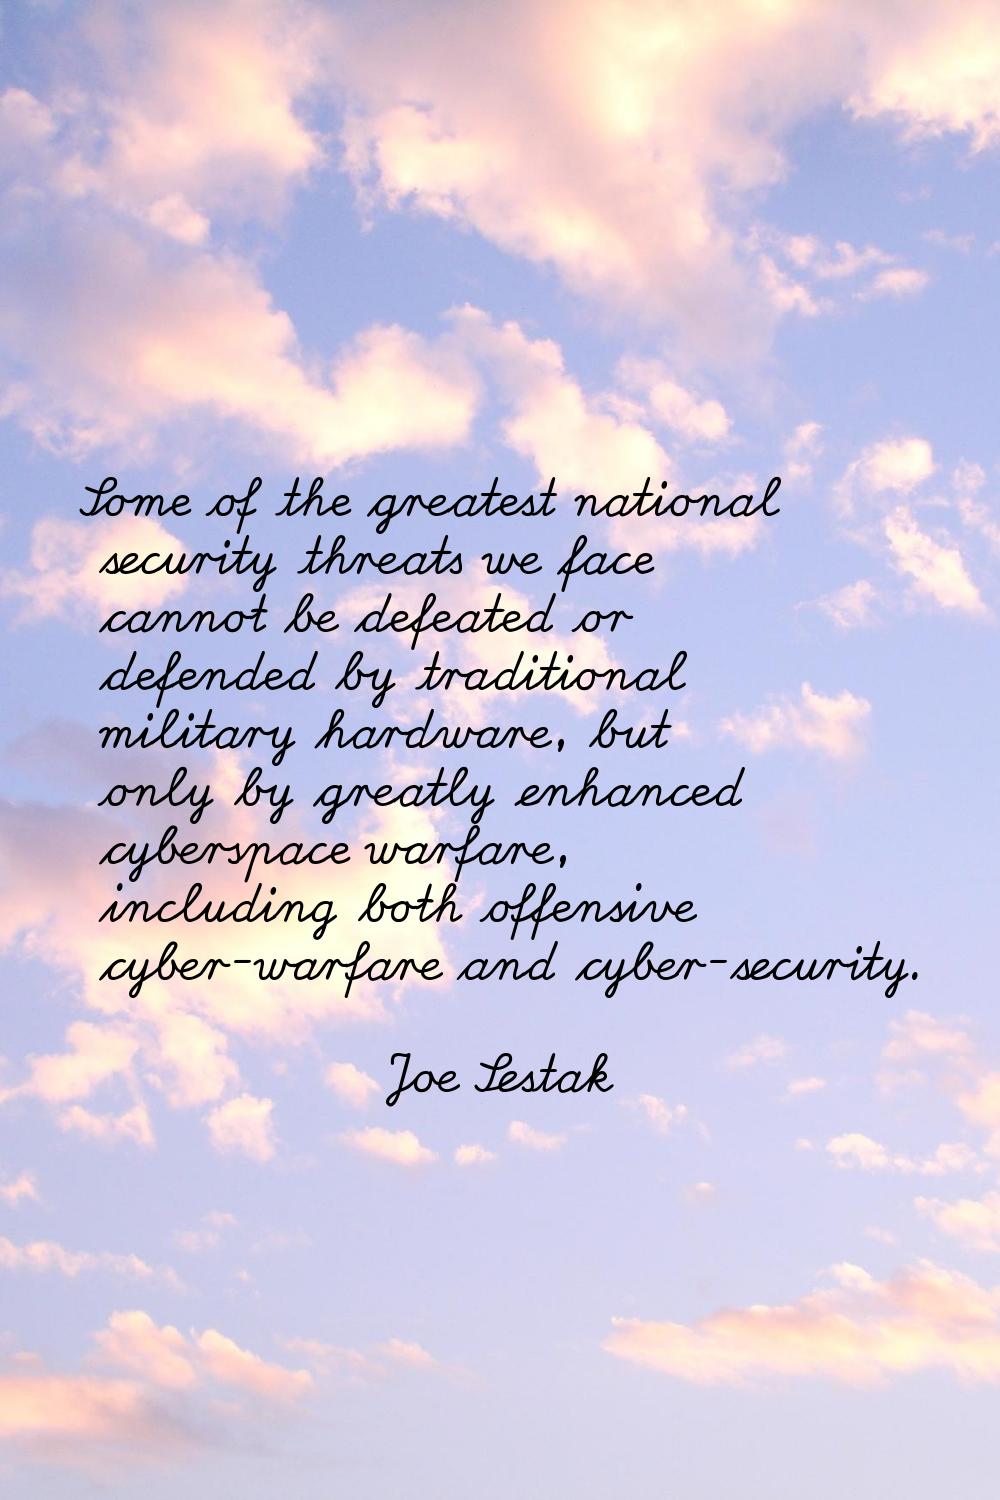 Some of the greatest national security threats we face cannot be defeated or defended by traditiona